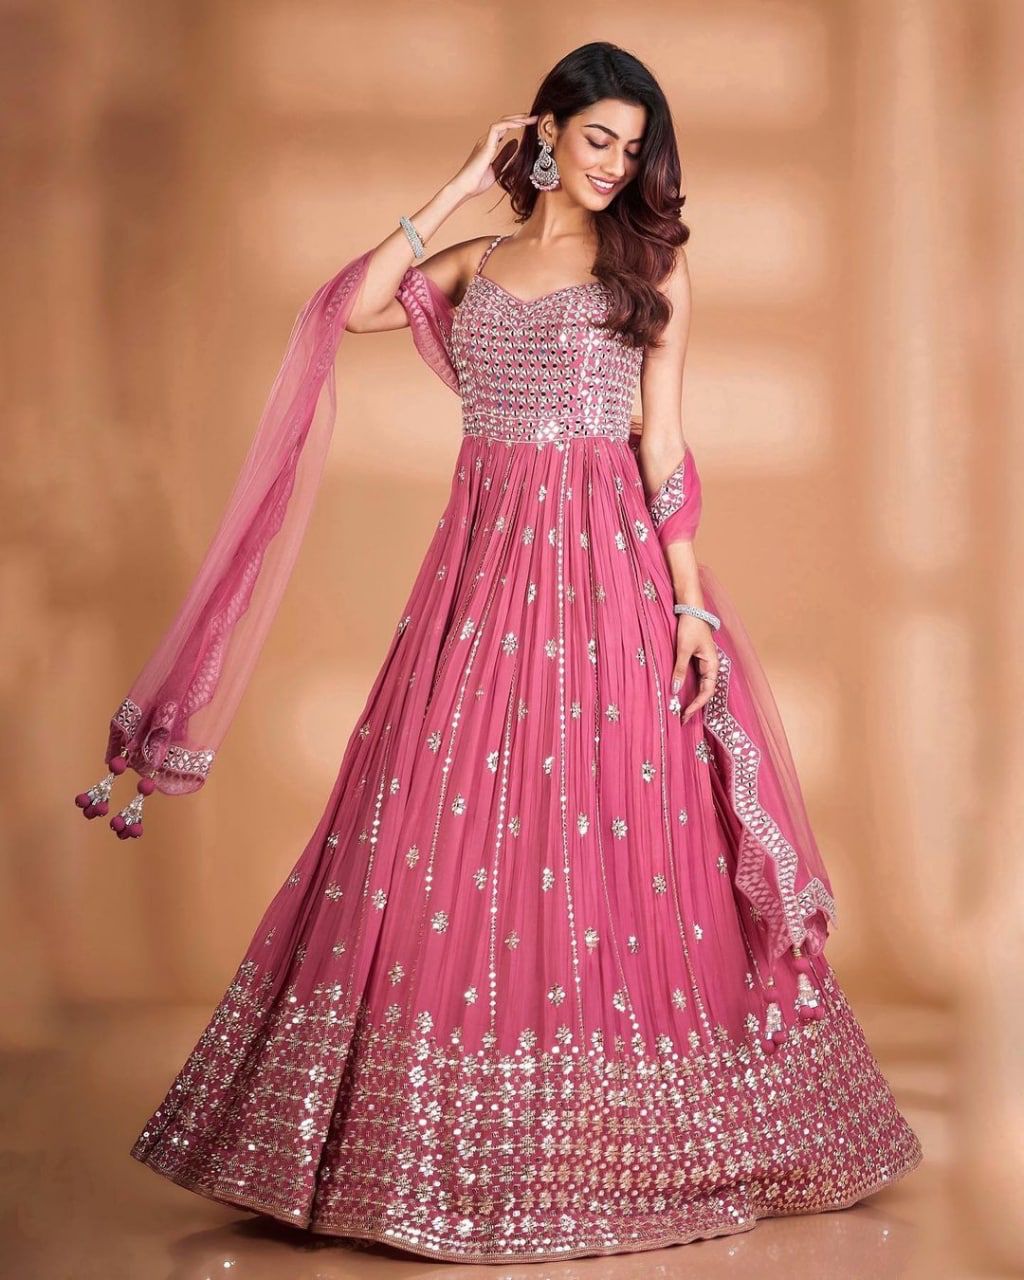 Affordable Ball Gowns & Dresses - Elegant Ball Gowns Online – SMCDress